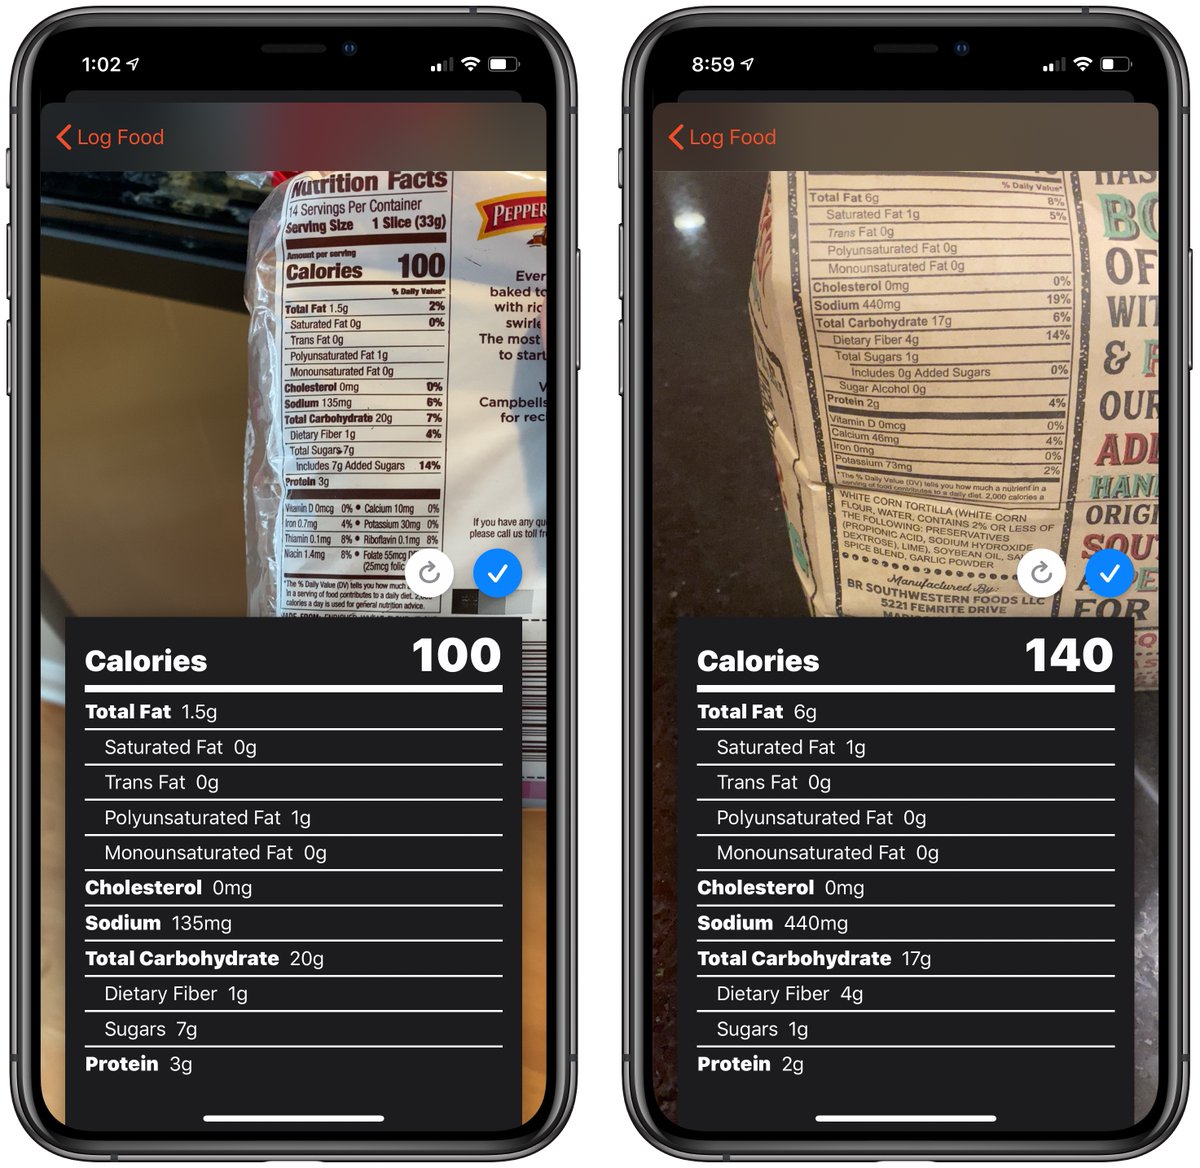 You can record the nutritional content of what you eat – or crowdsource a food database to compete with MyFitnessPal with far less effort than ever before.